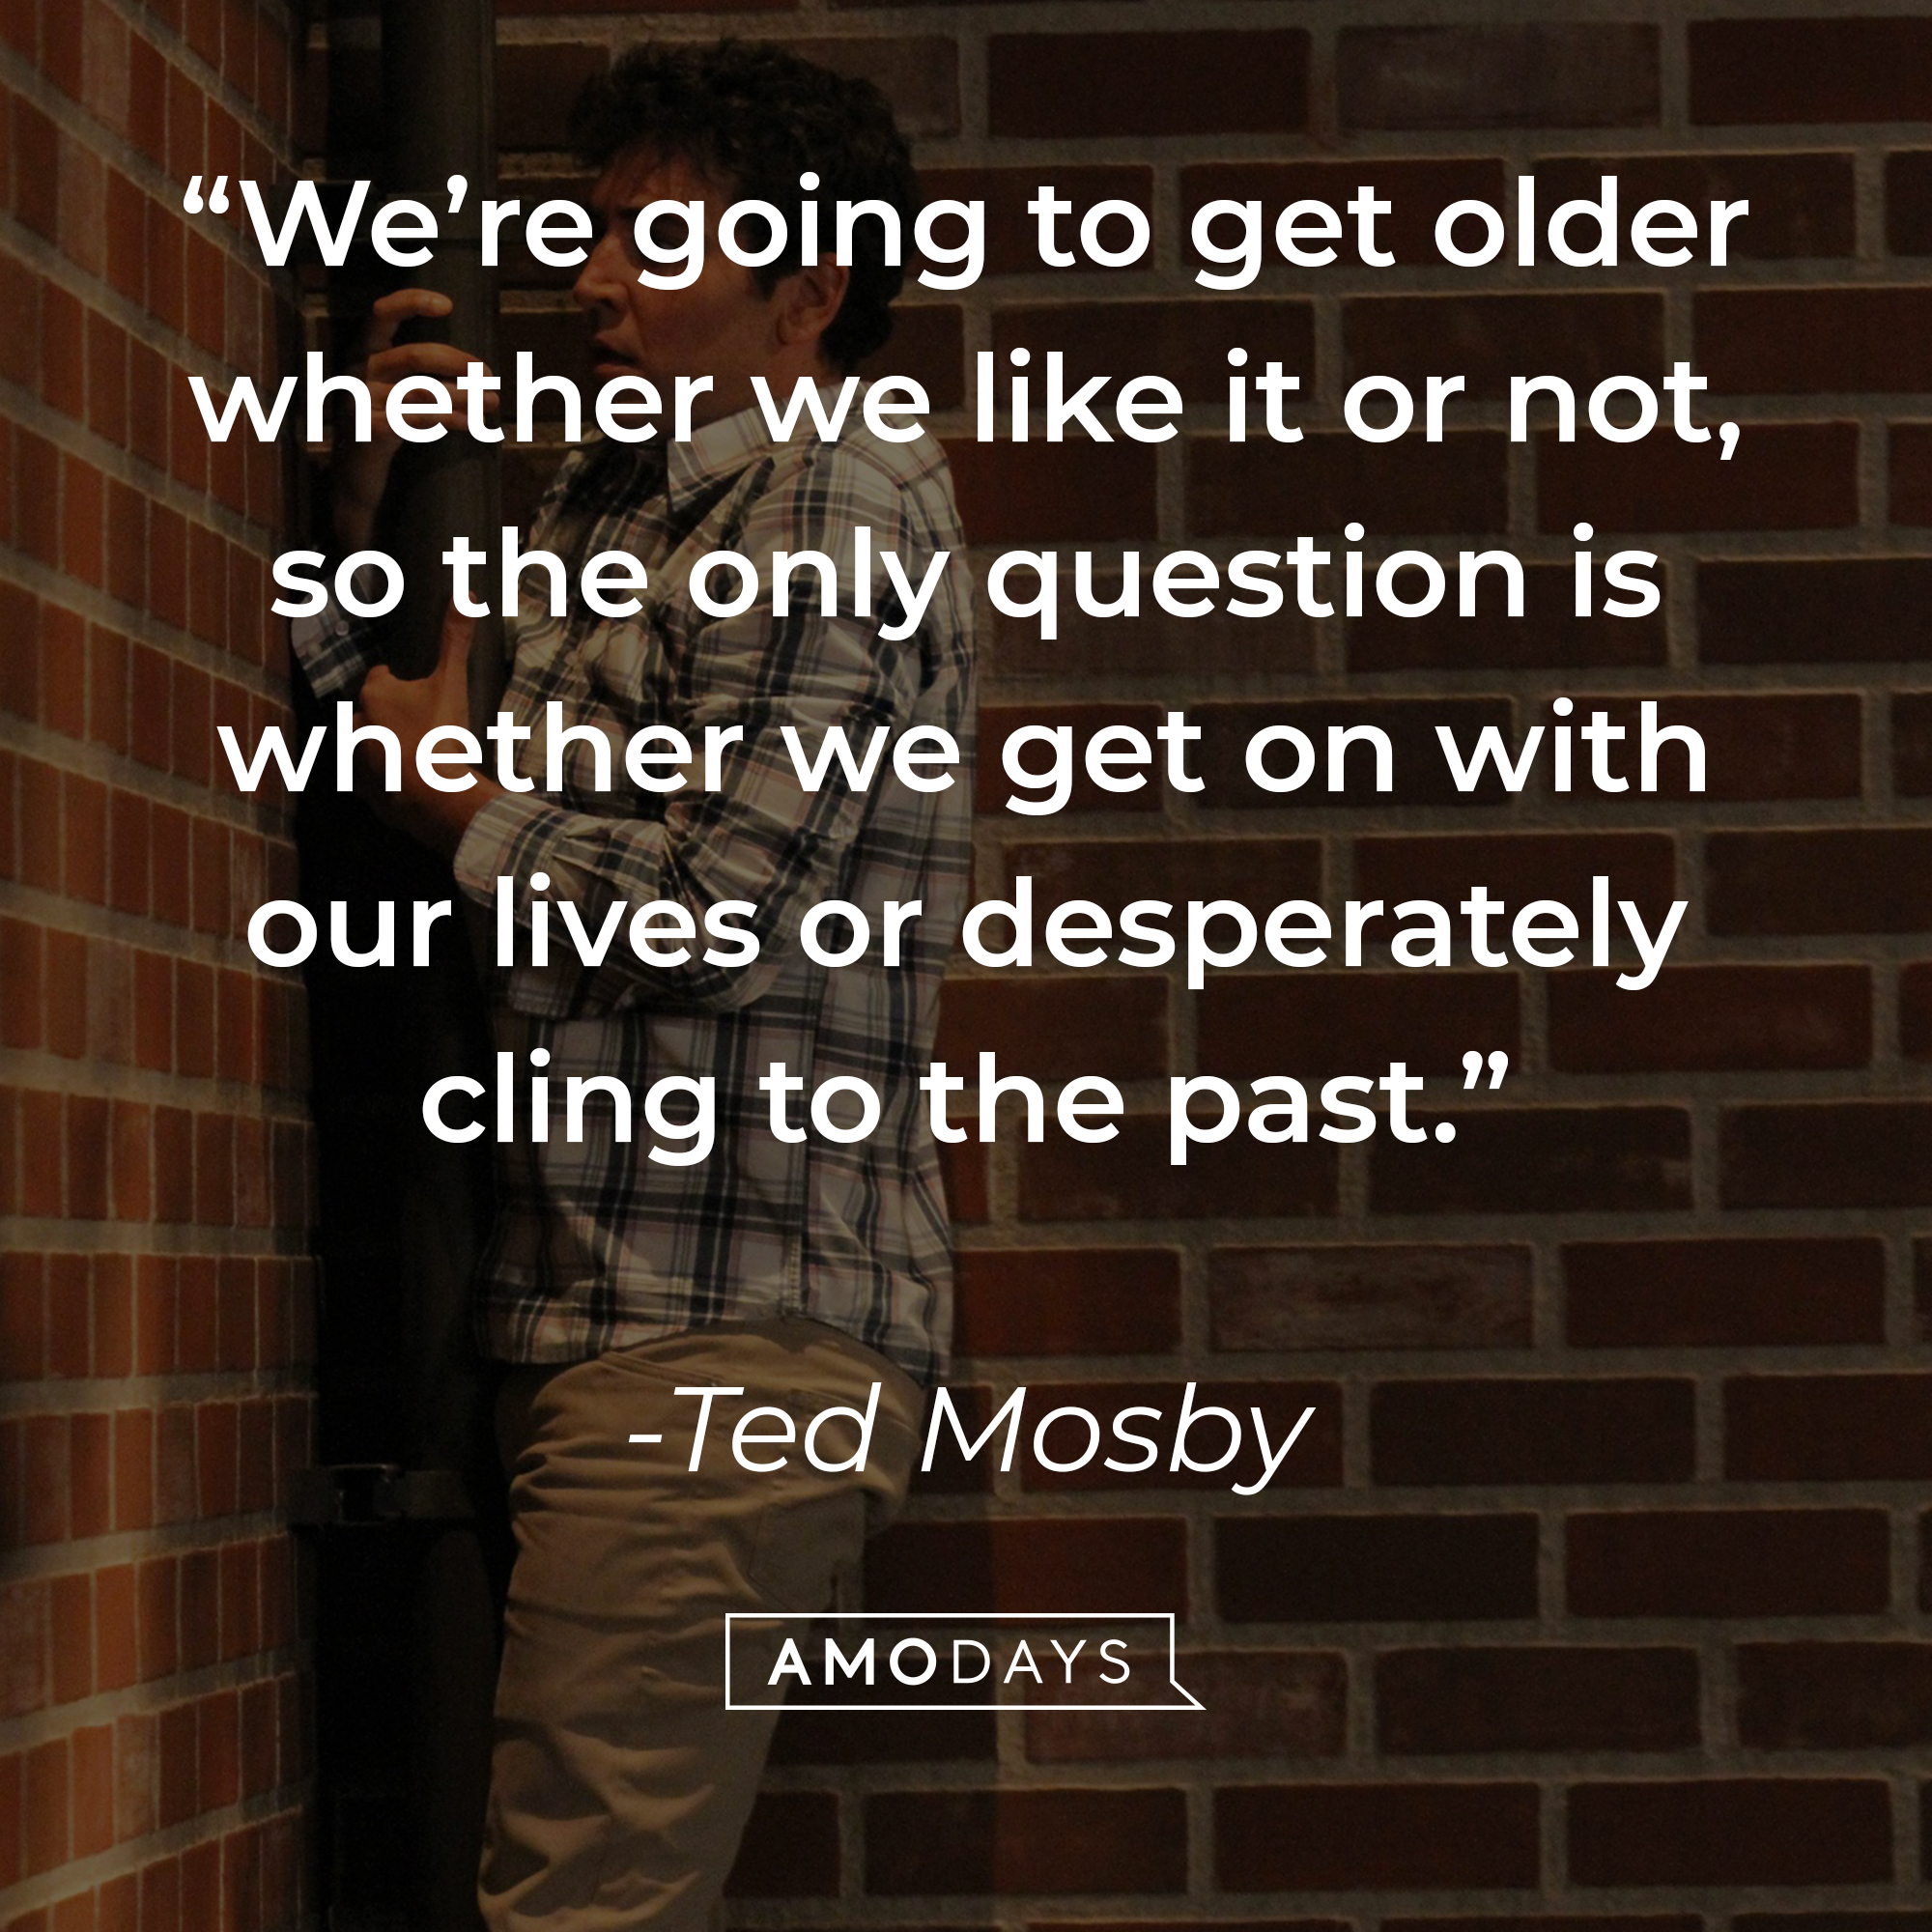 Ted Mosby's quote: “We’re going to get older whether we like it or not, so the only question is whether we get on with our lives or desperately cling to the past.” | Source: facebook.com/OfficialHowIMetYourMother